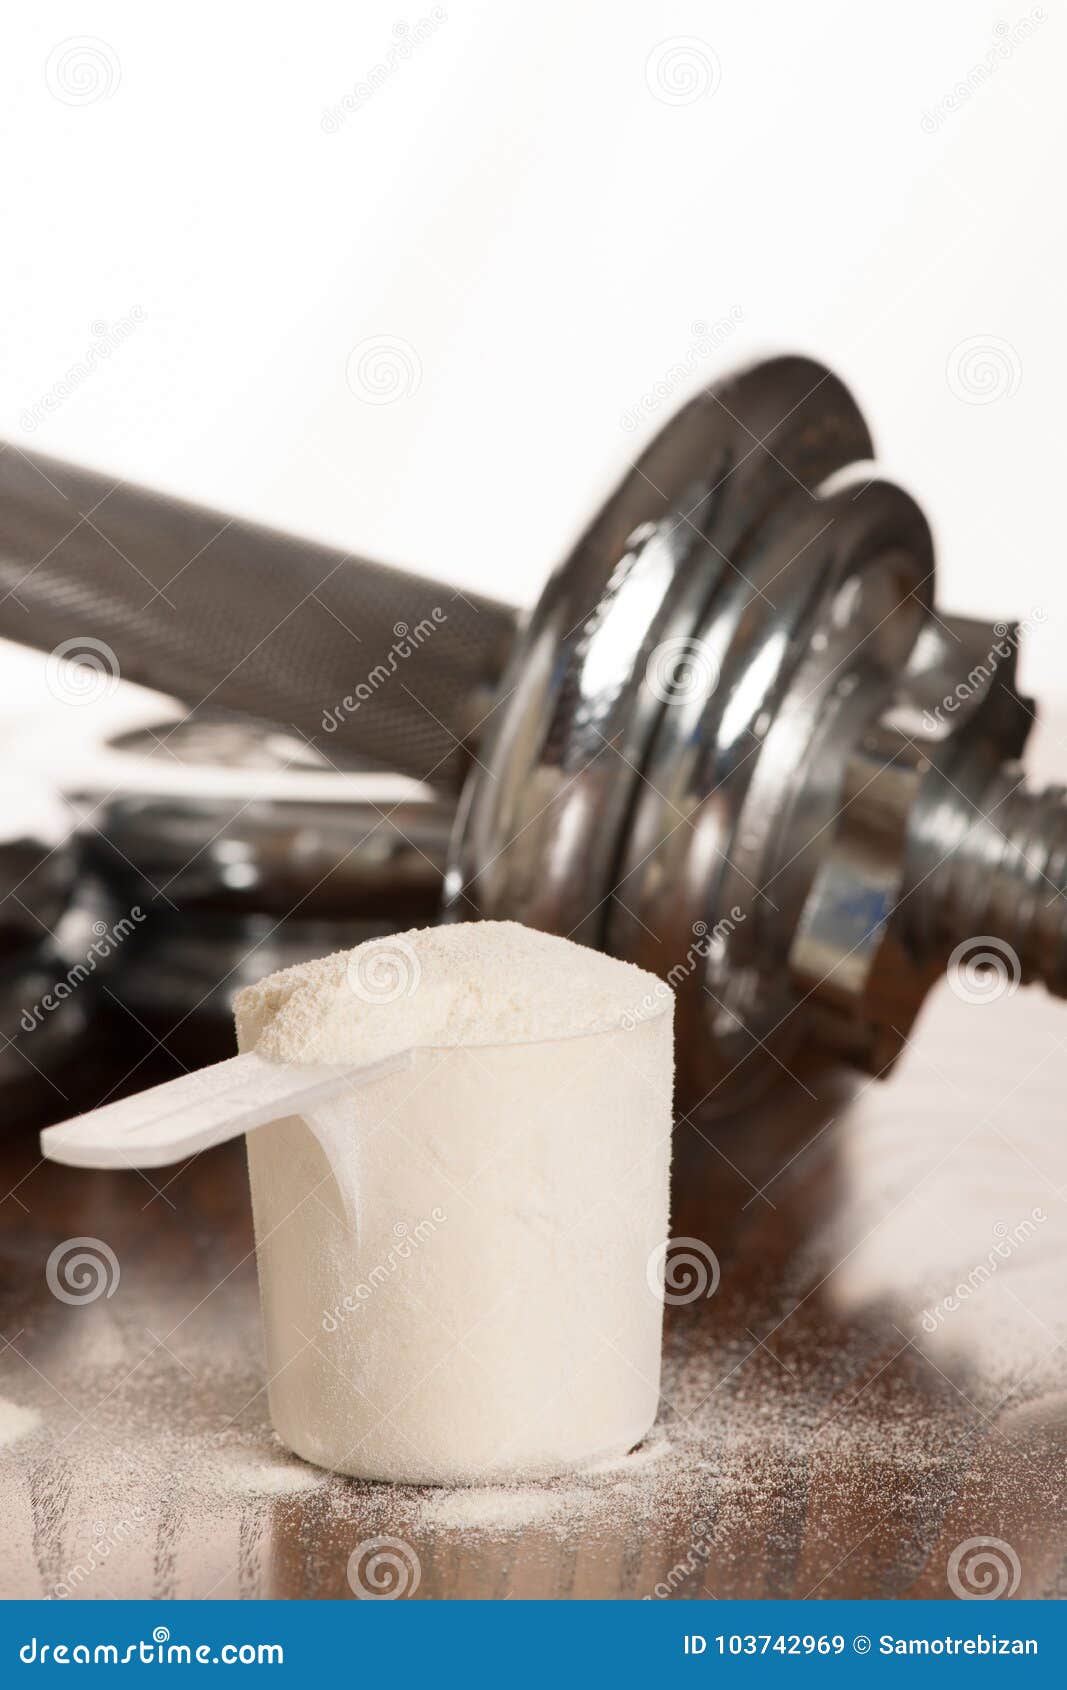 https://thumbs.dreamstime.com/z/protein-powder-scoope-dumbbells-background-whey-protein-powder-scoope-dumbbells-background-whey-103742969.jpg